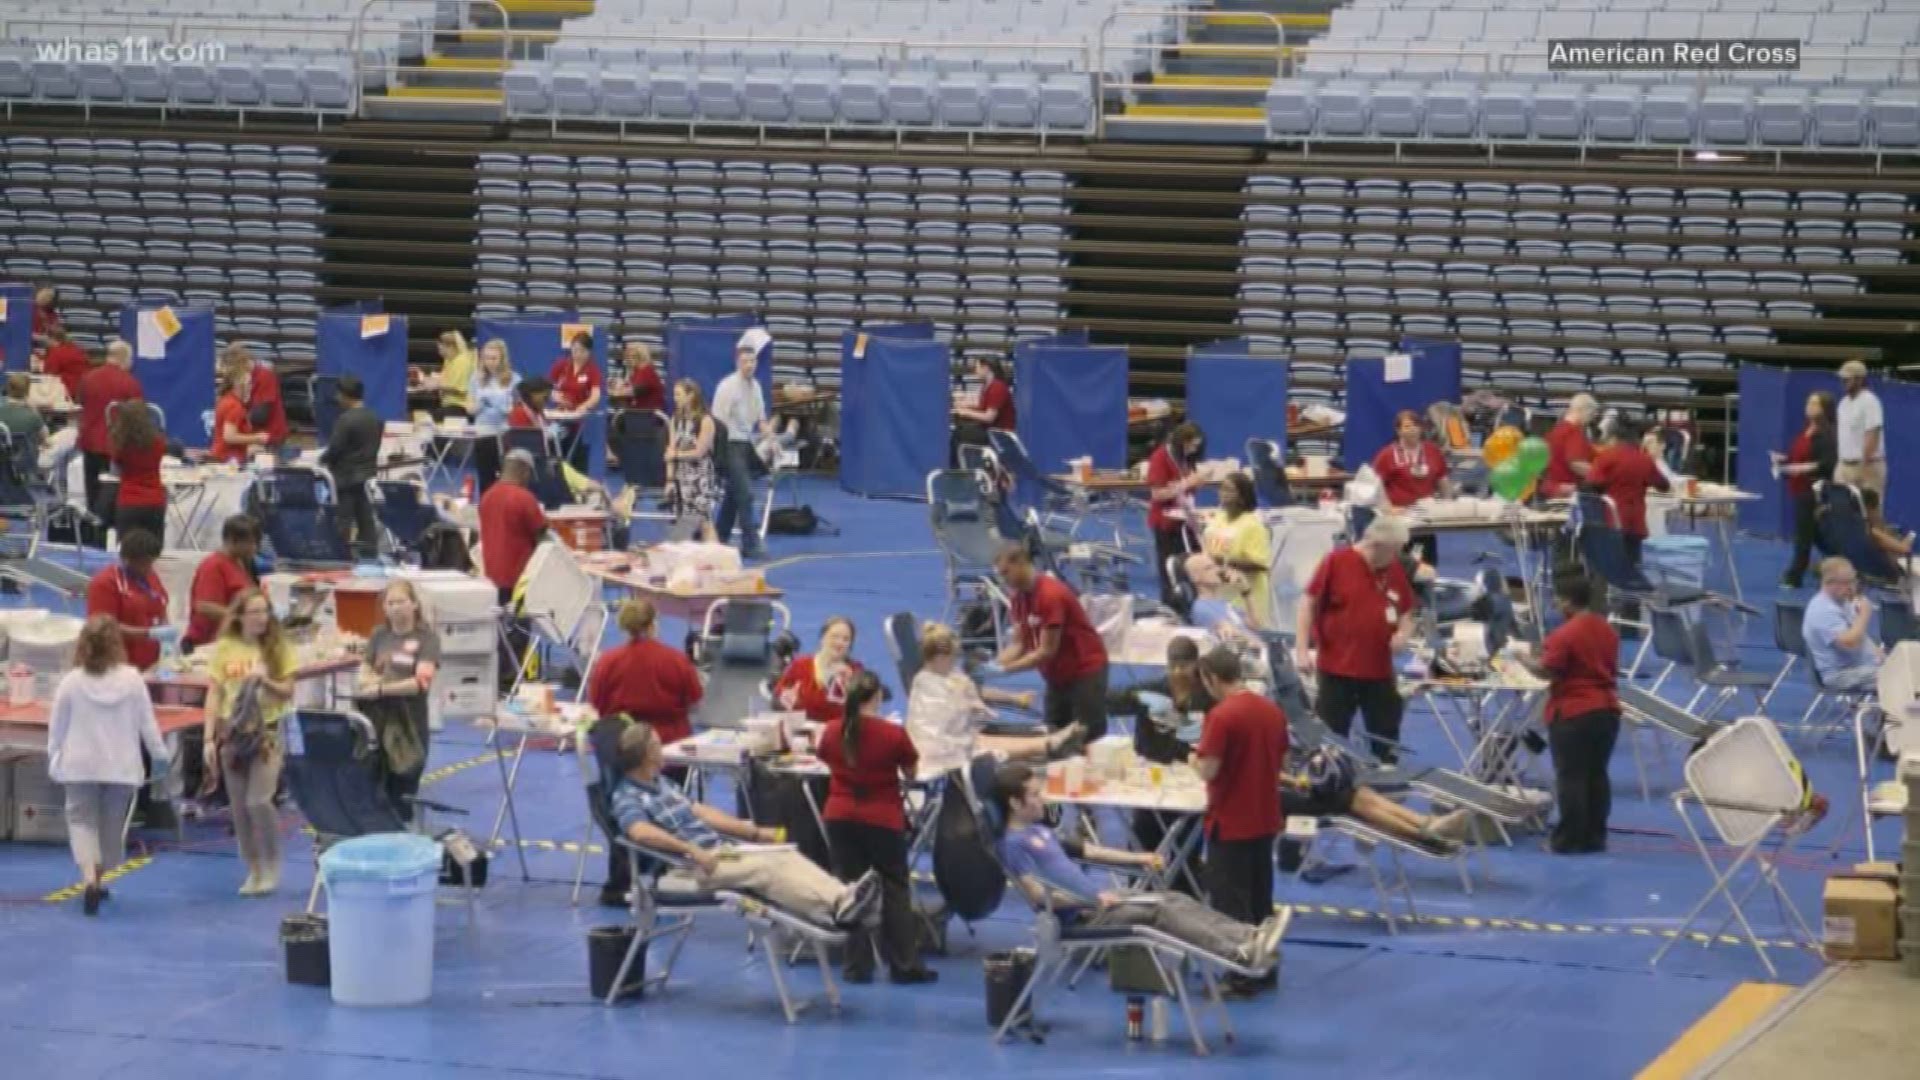 The competition between states to see who can collect the most blood donations runs through Friday